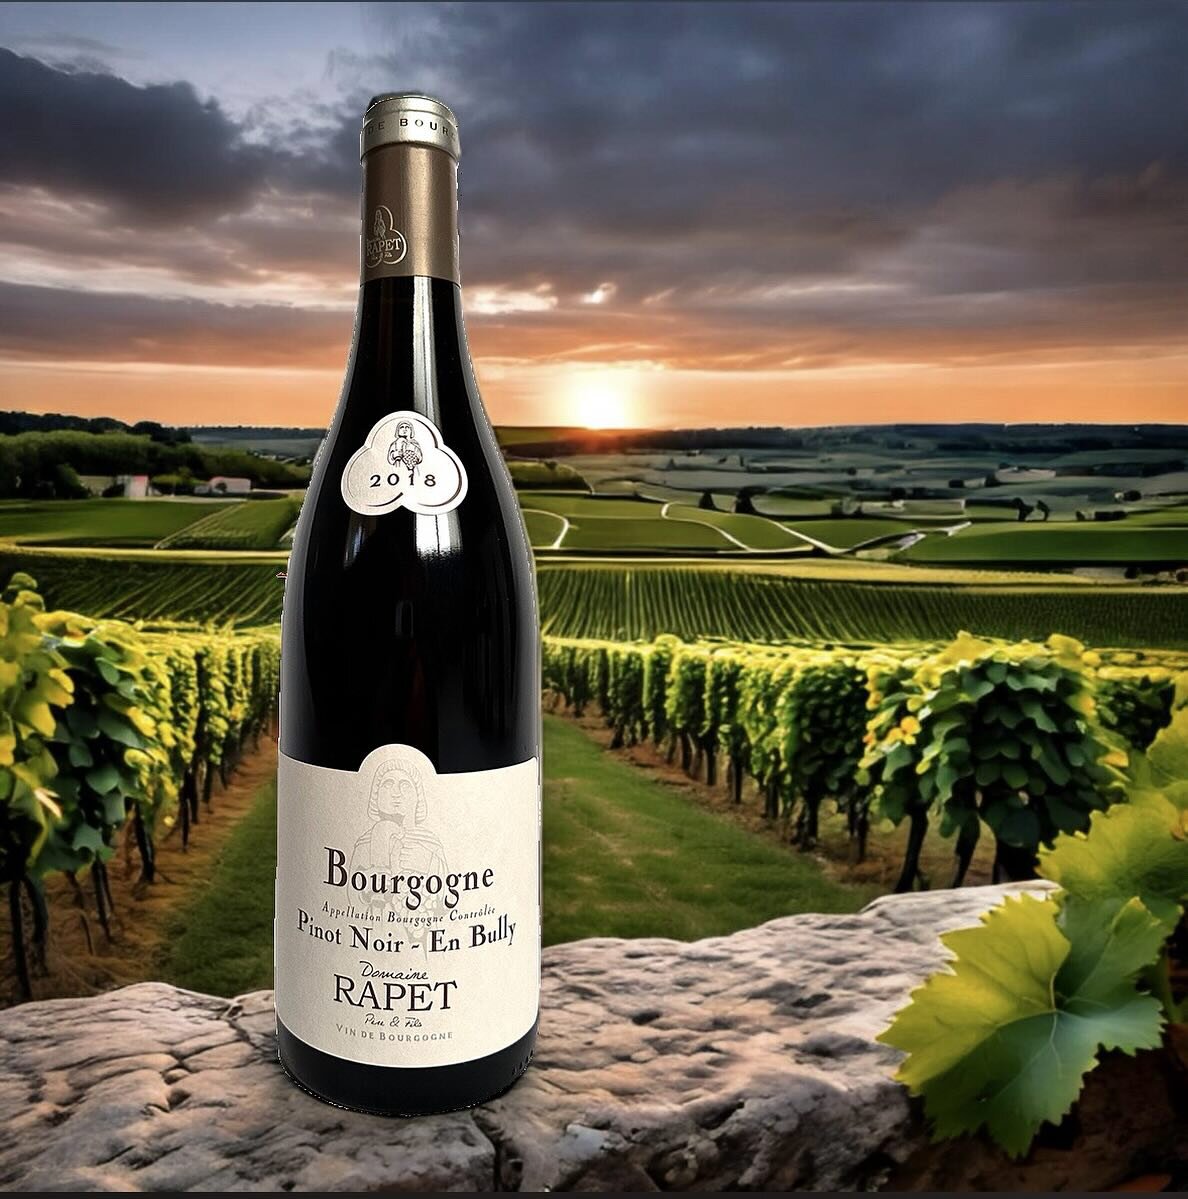 The Rapet Bourgogne Rouge &ldquo;En Bully&rdquo; is from a tiny vineyard high on the back-side of Corton, at an altitude of 350 meters on the slope facing Les Hautes-C&ocirc;tes on the locality named La Grande Corv&eacute;e de Bully. The soils are li